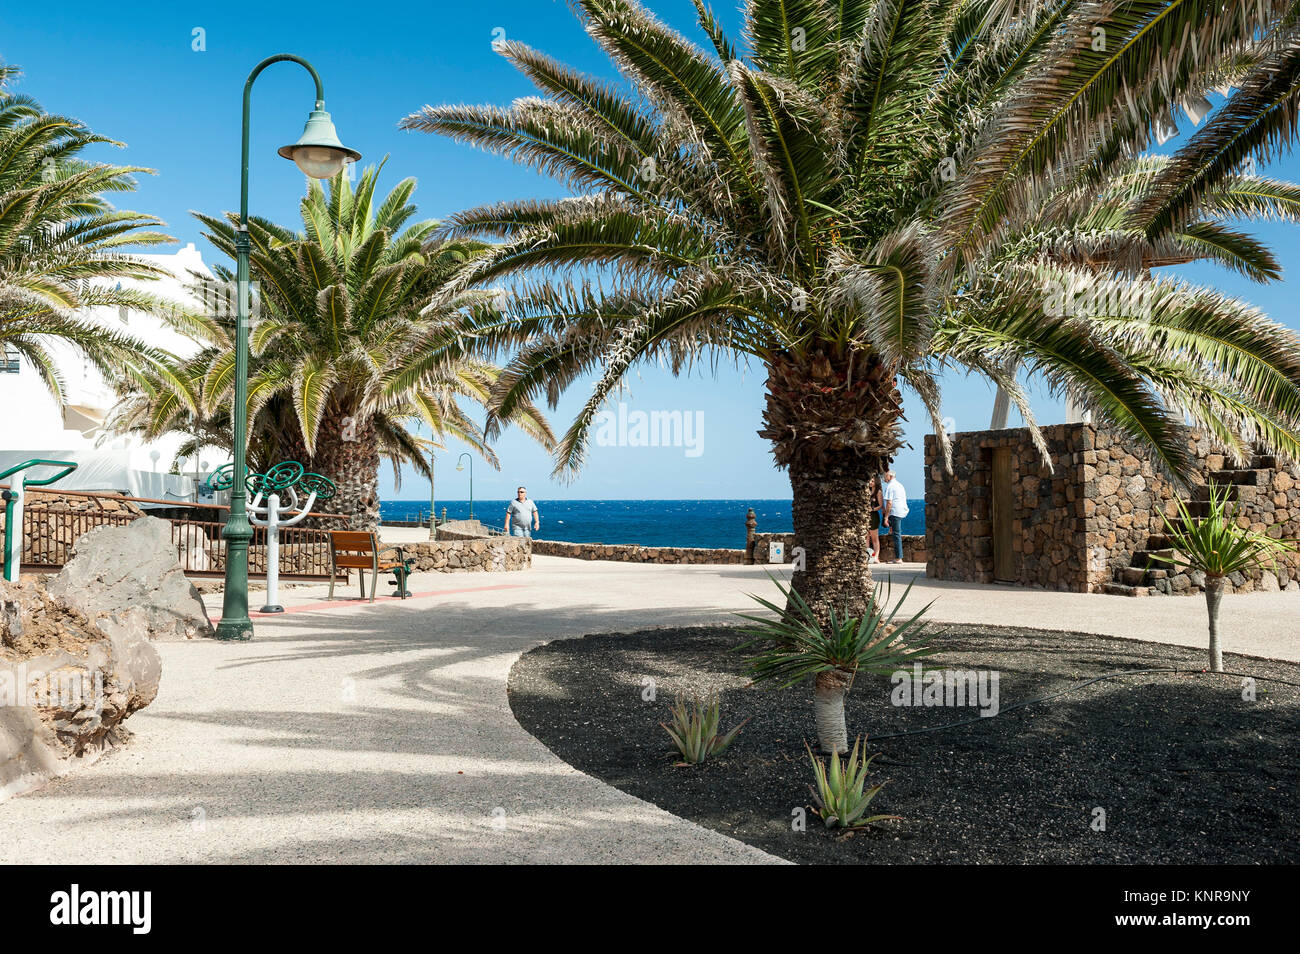 Promenade in Costa Teguise, Lanzarote in the Canary Islands, Spain Stock Photo